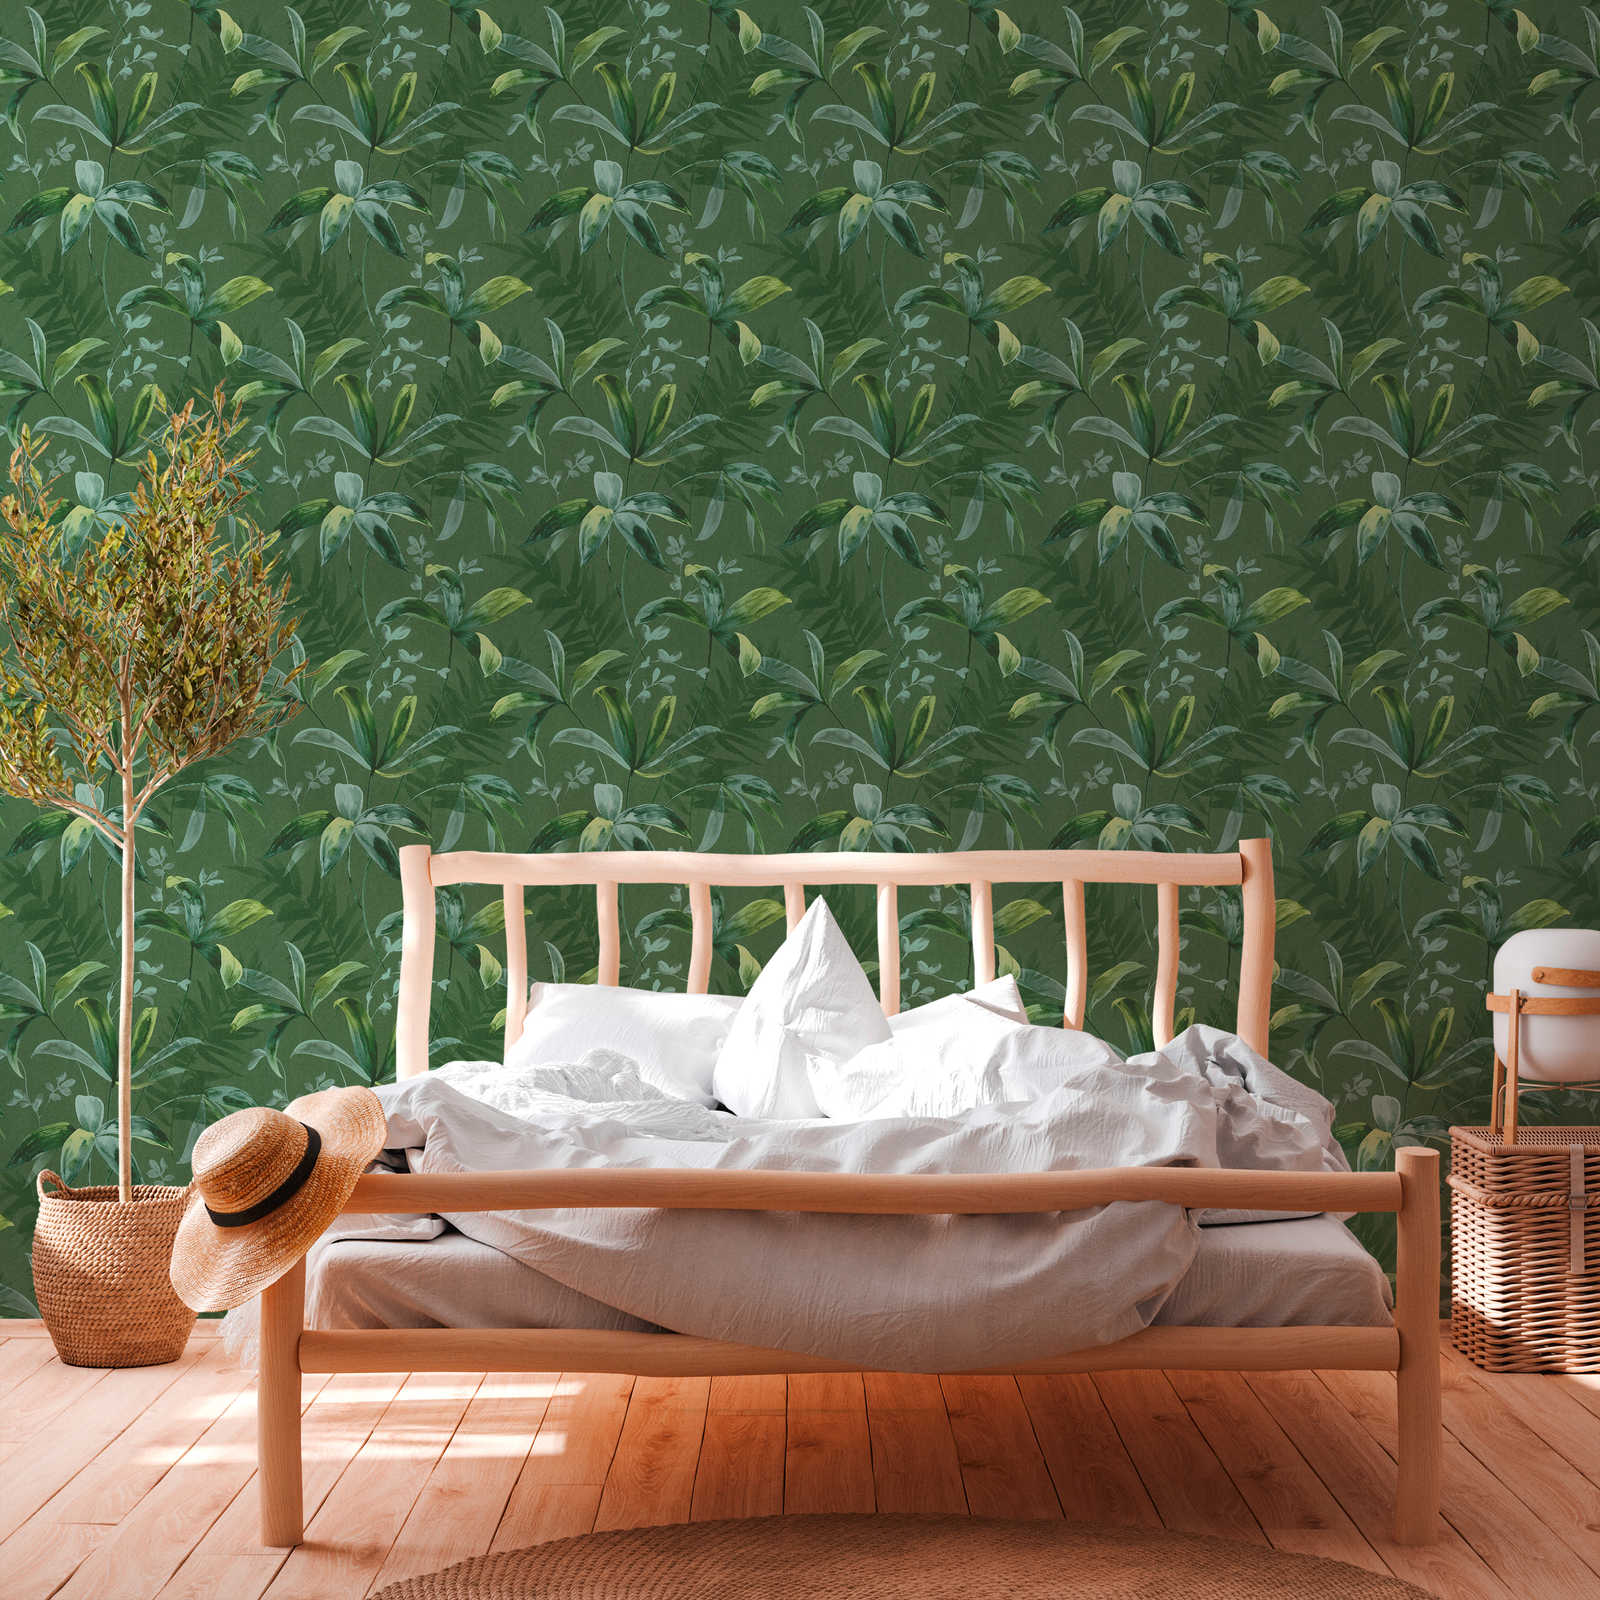             Non-woven wallpaper green leaves pattern in watercolour style - green
        